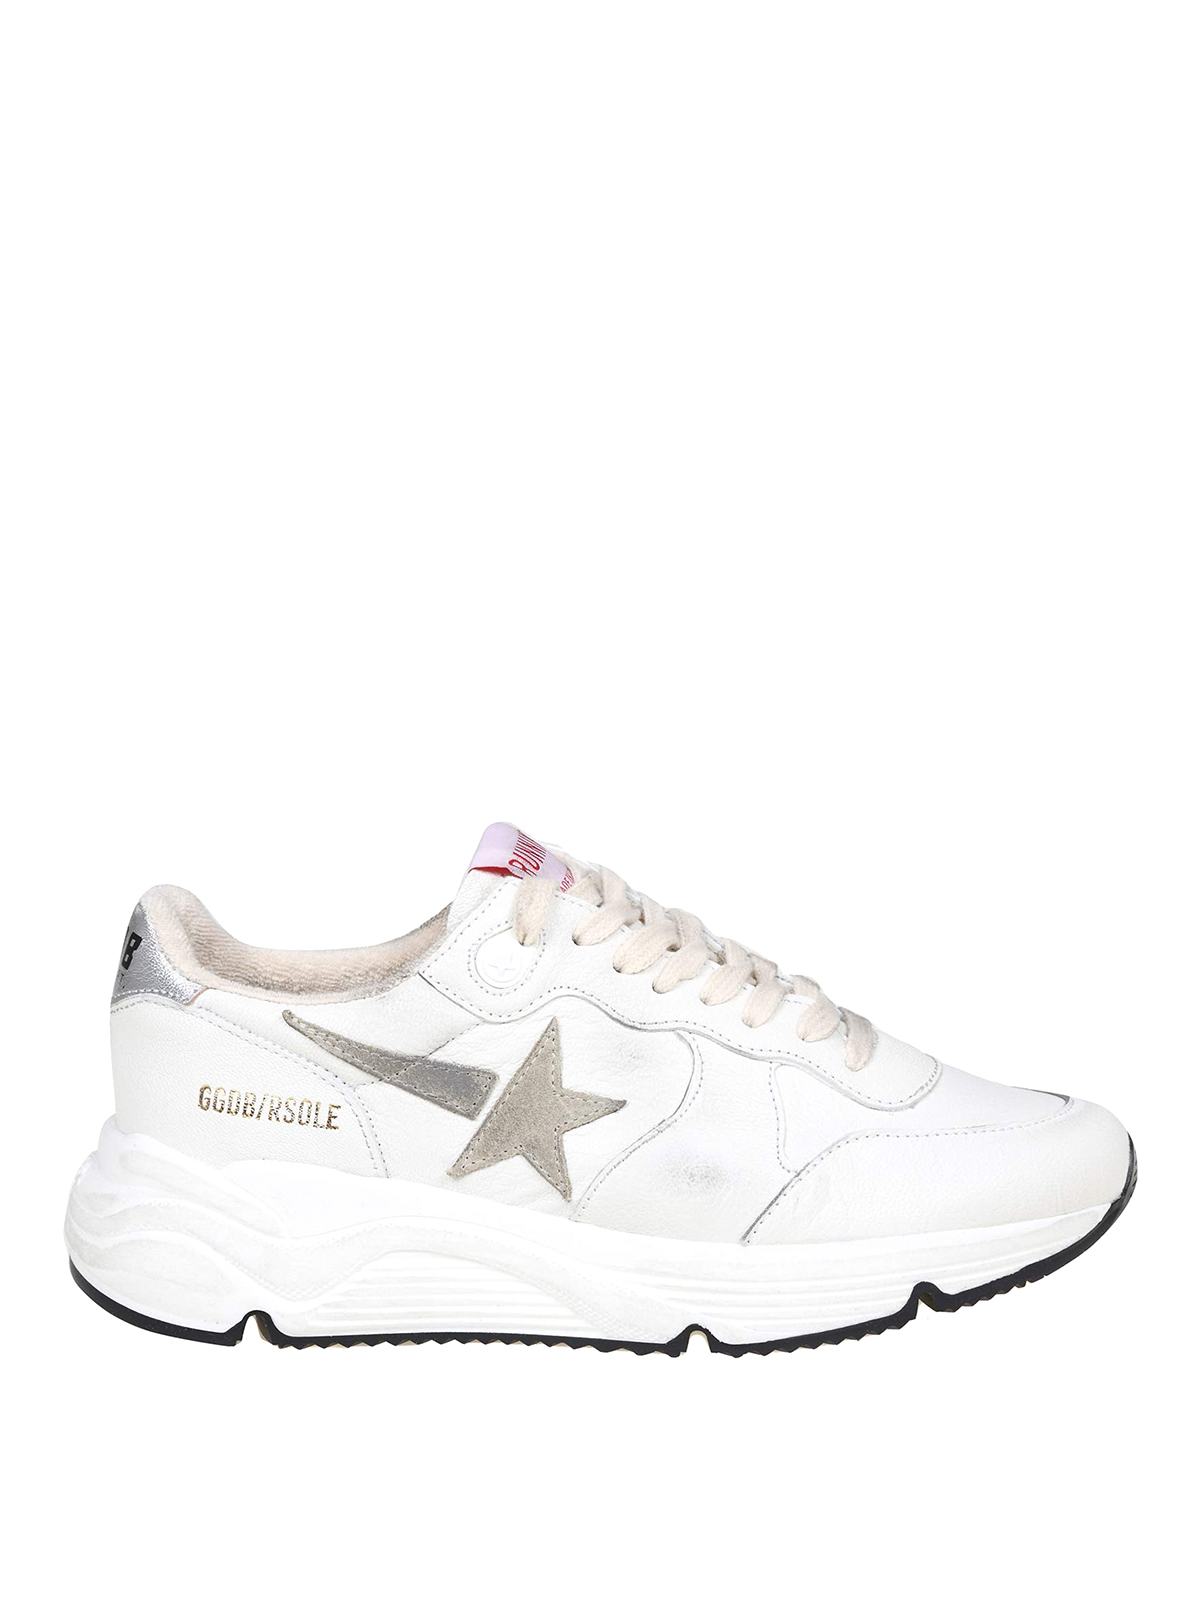 Golden Goose Running Sole Sneakers In White Leather